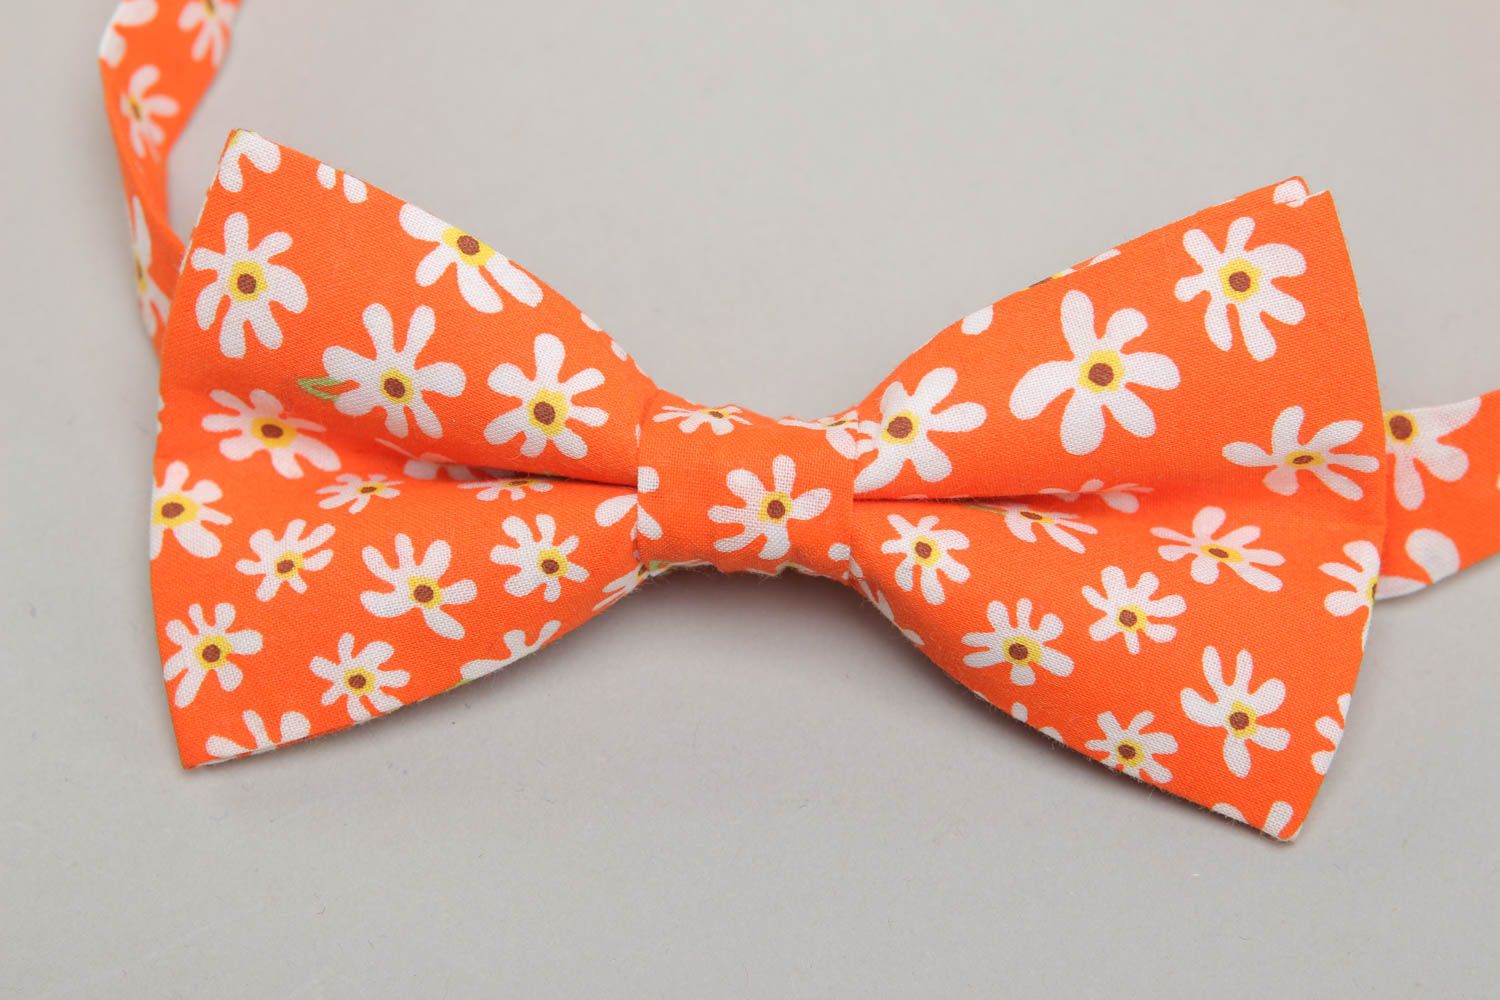 Orange fabric bow tie with floral pattern photo 2